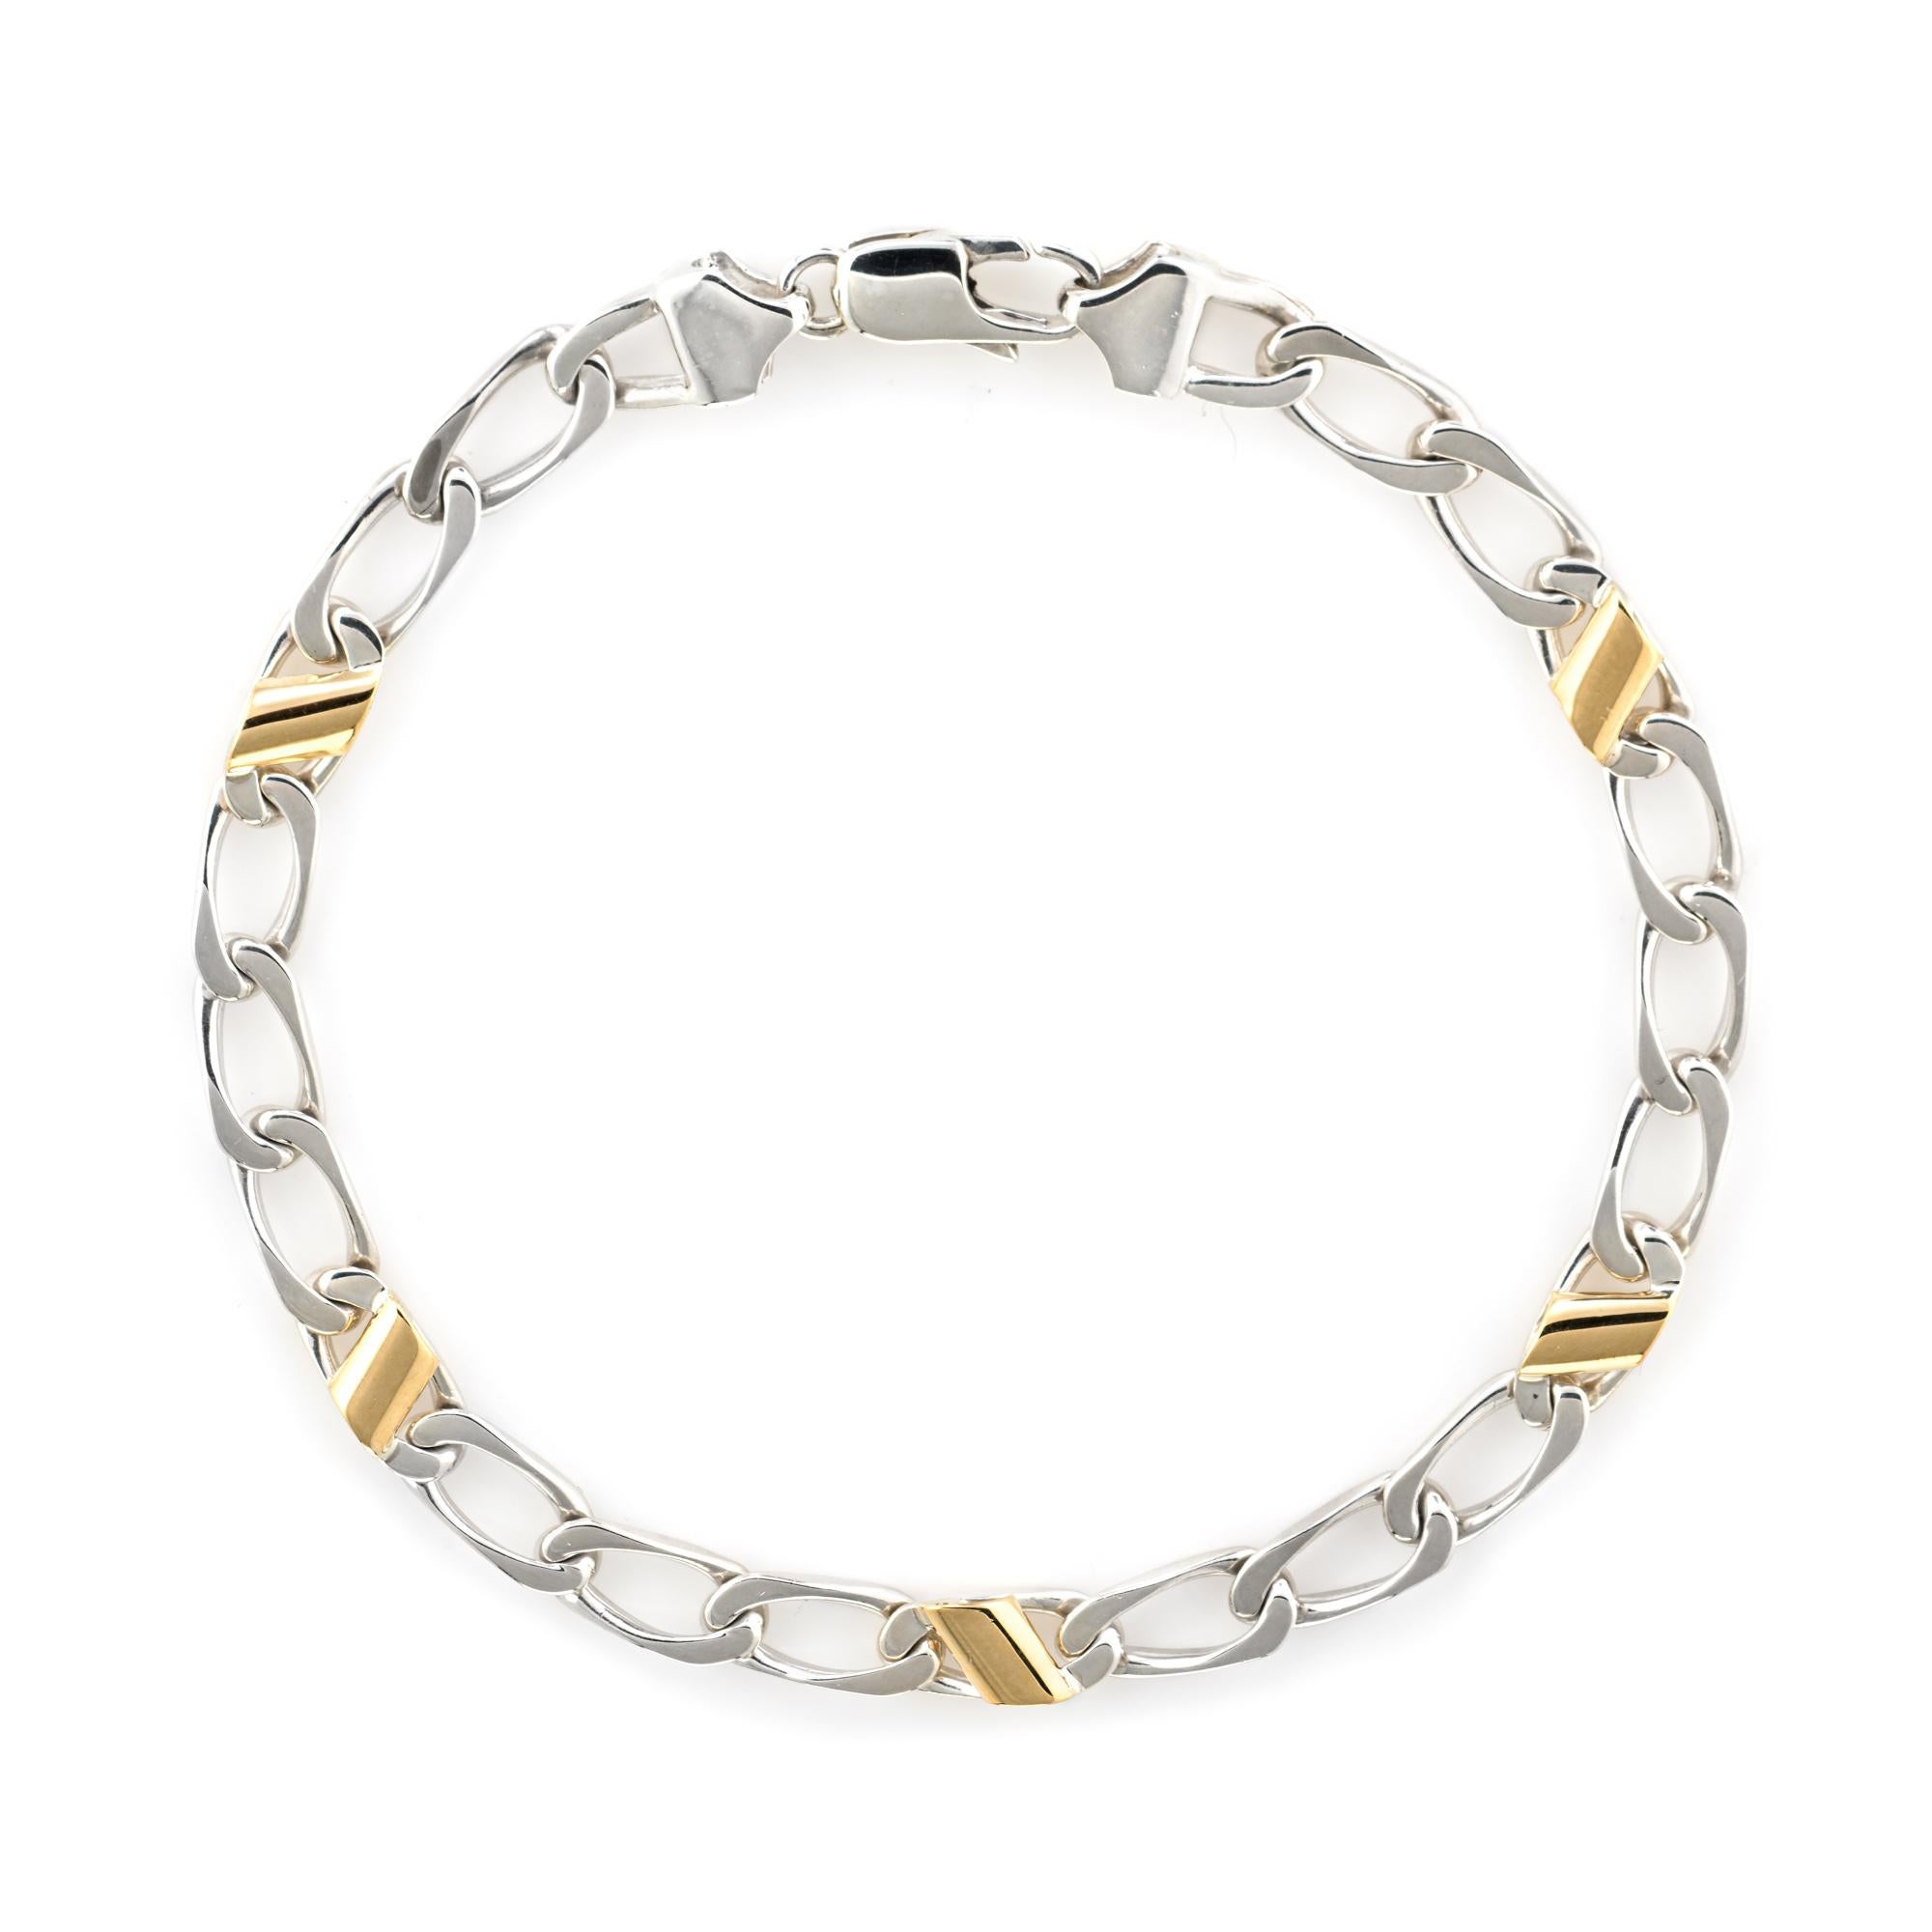 Stylish and finely detailed vintage Tiffany & Co curb link bracelet, crafted in sterling silver with 18k yellow gold accents.  

The curb link bracelet features five 18k yellow gold bar accents. The bracelet is great worn alone or layered with your